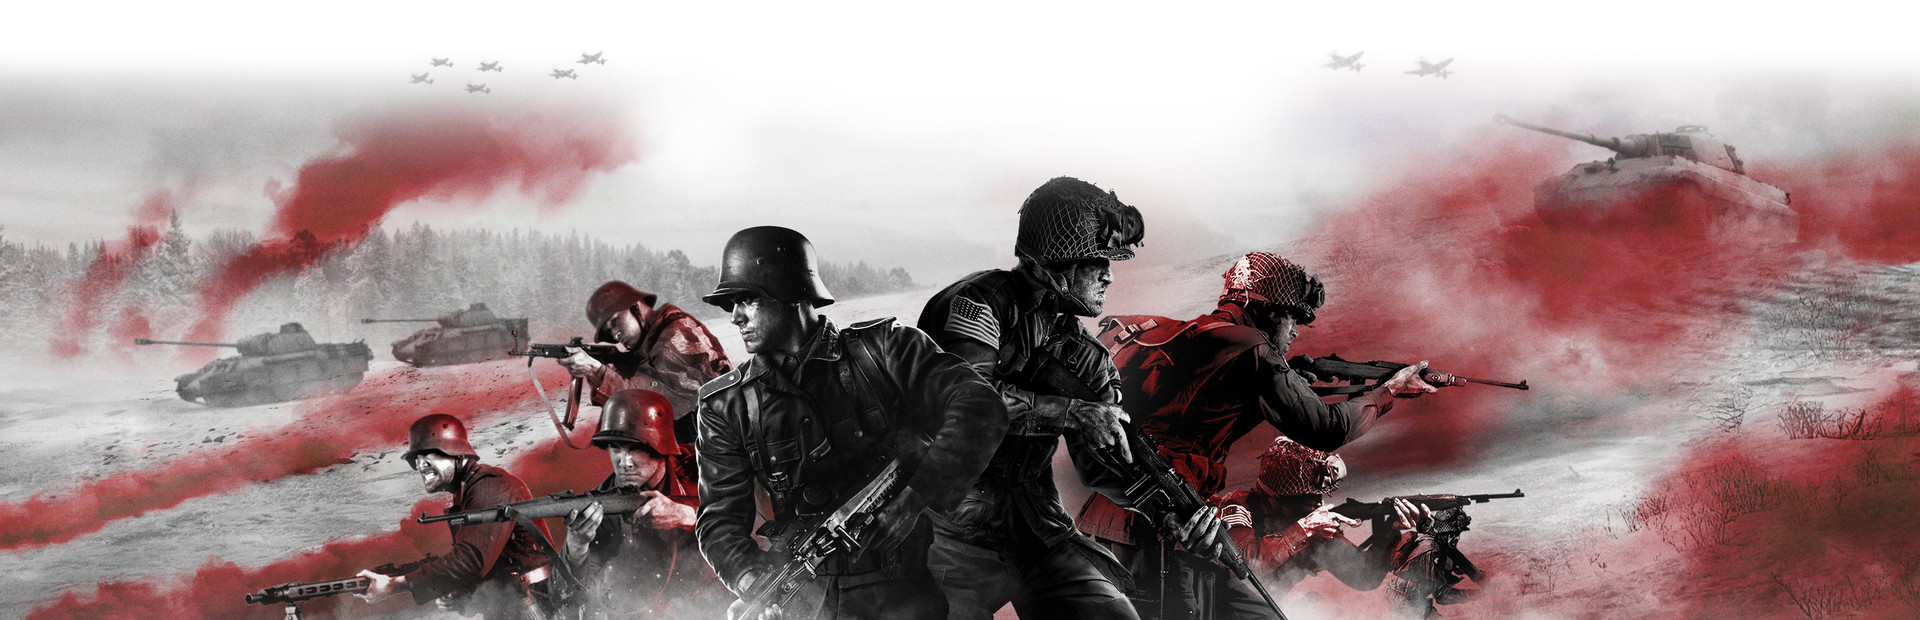 Company of Heroes 2 cover image